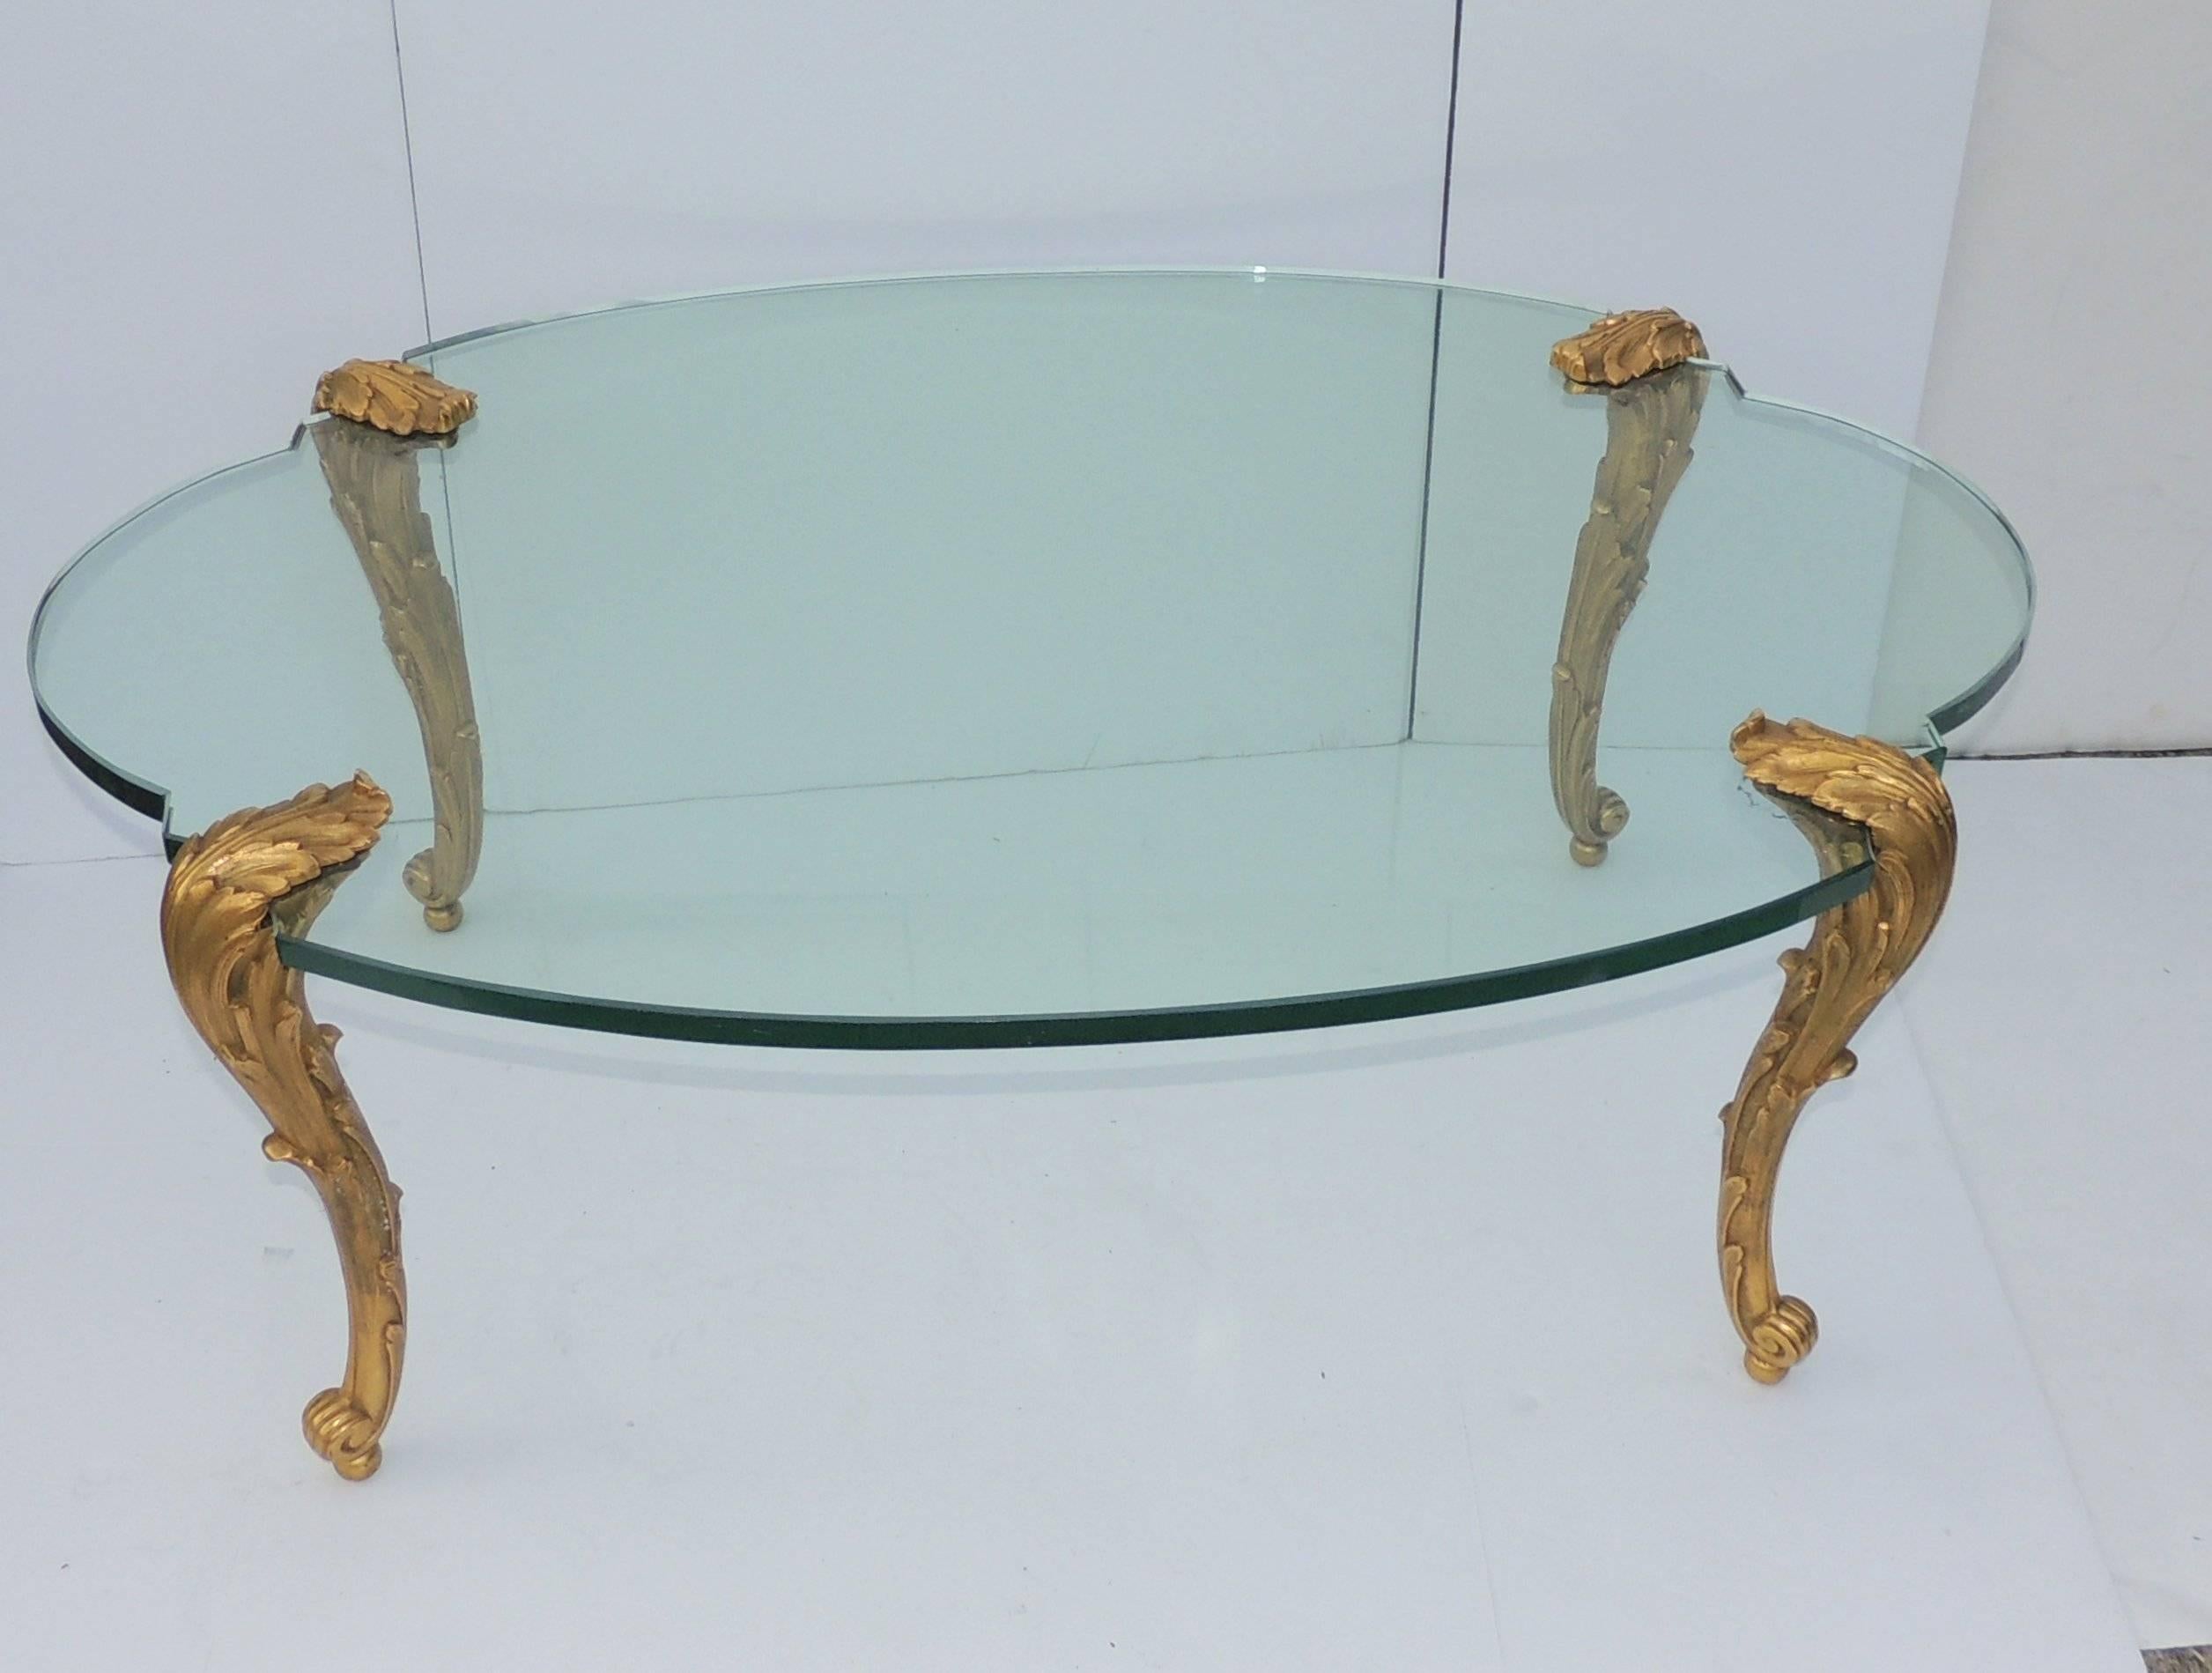 Wonderful oval shaped coffee table with thick cartouche glass and beautiful bronze Guerin detailed legs.

Measures: 29 